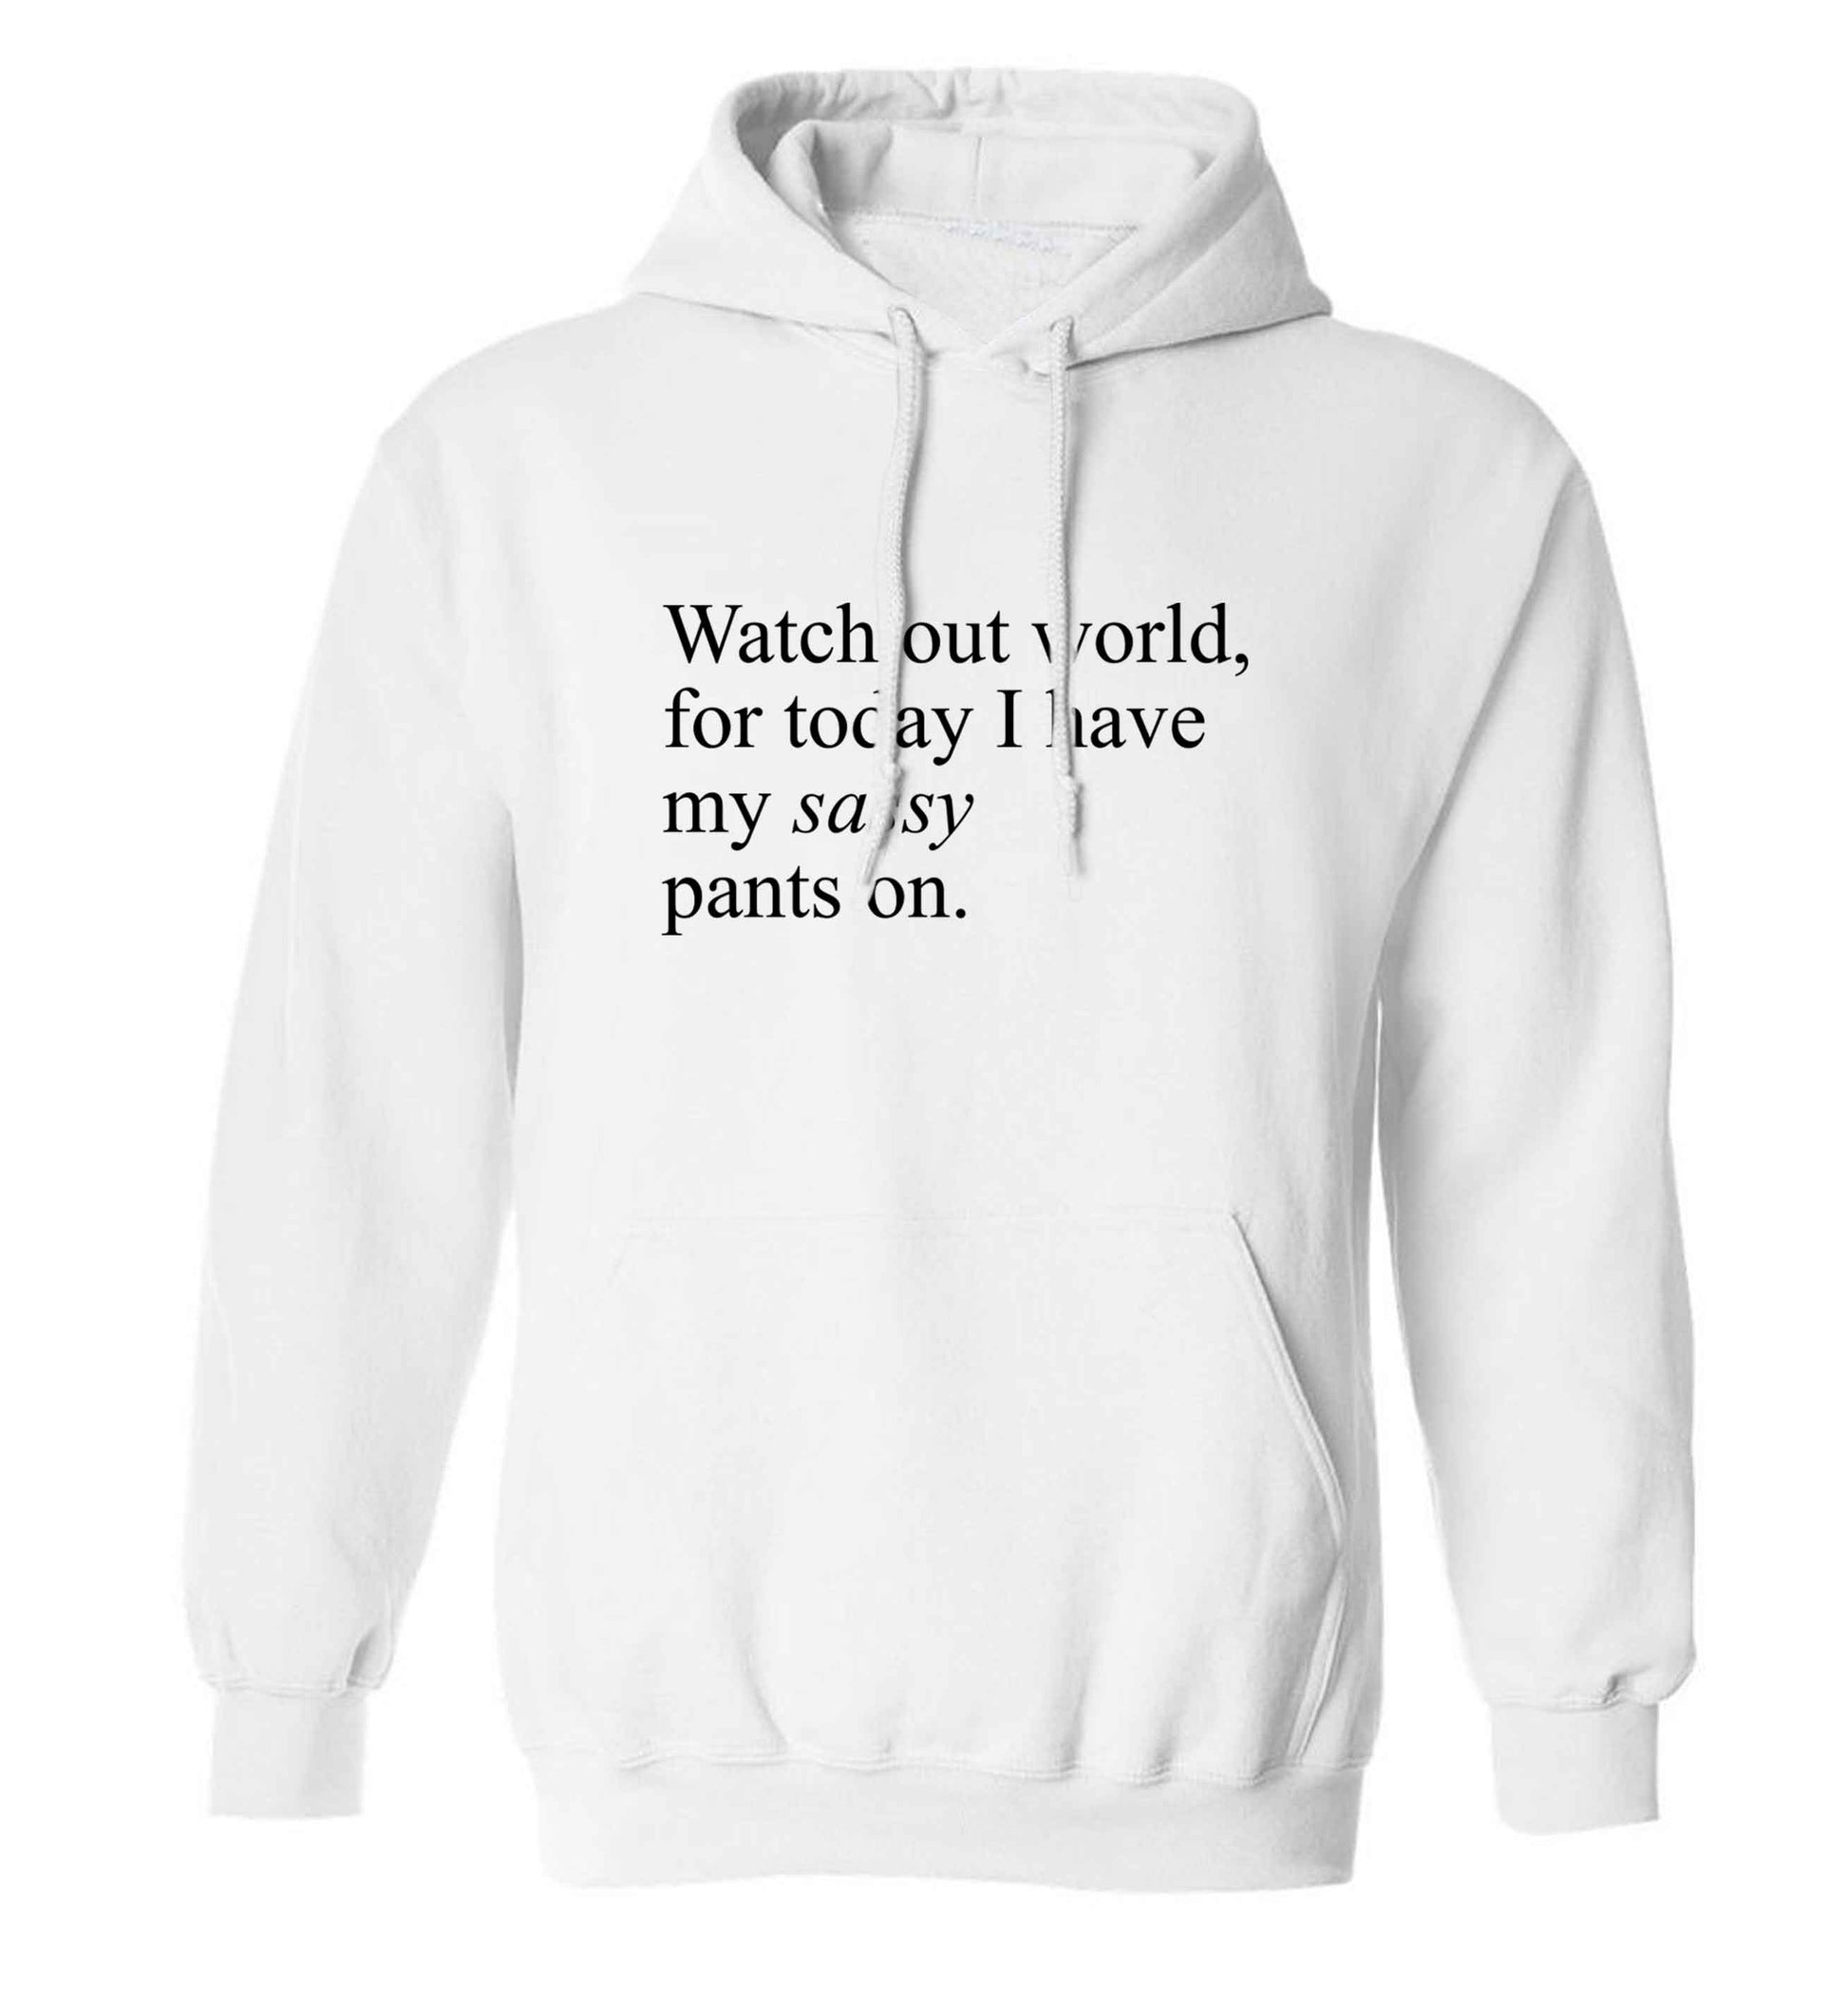 Watch out world for today I have my sassy pants on adults unisex white hoodie 2XL